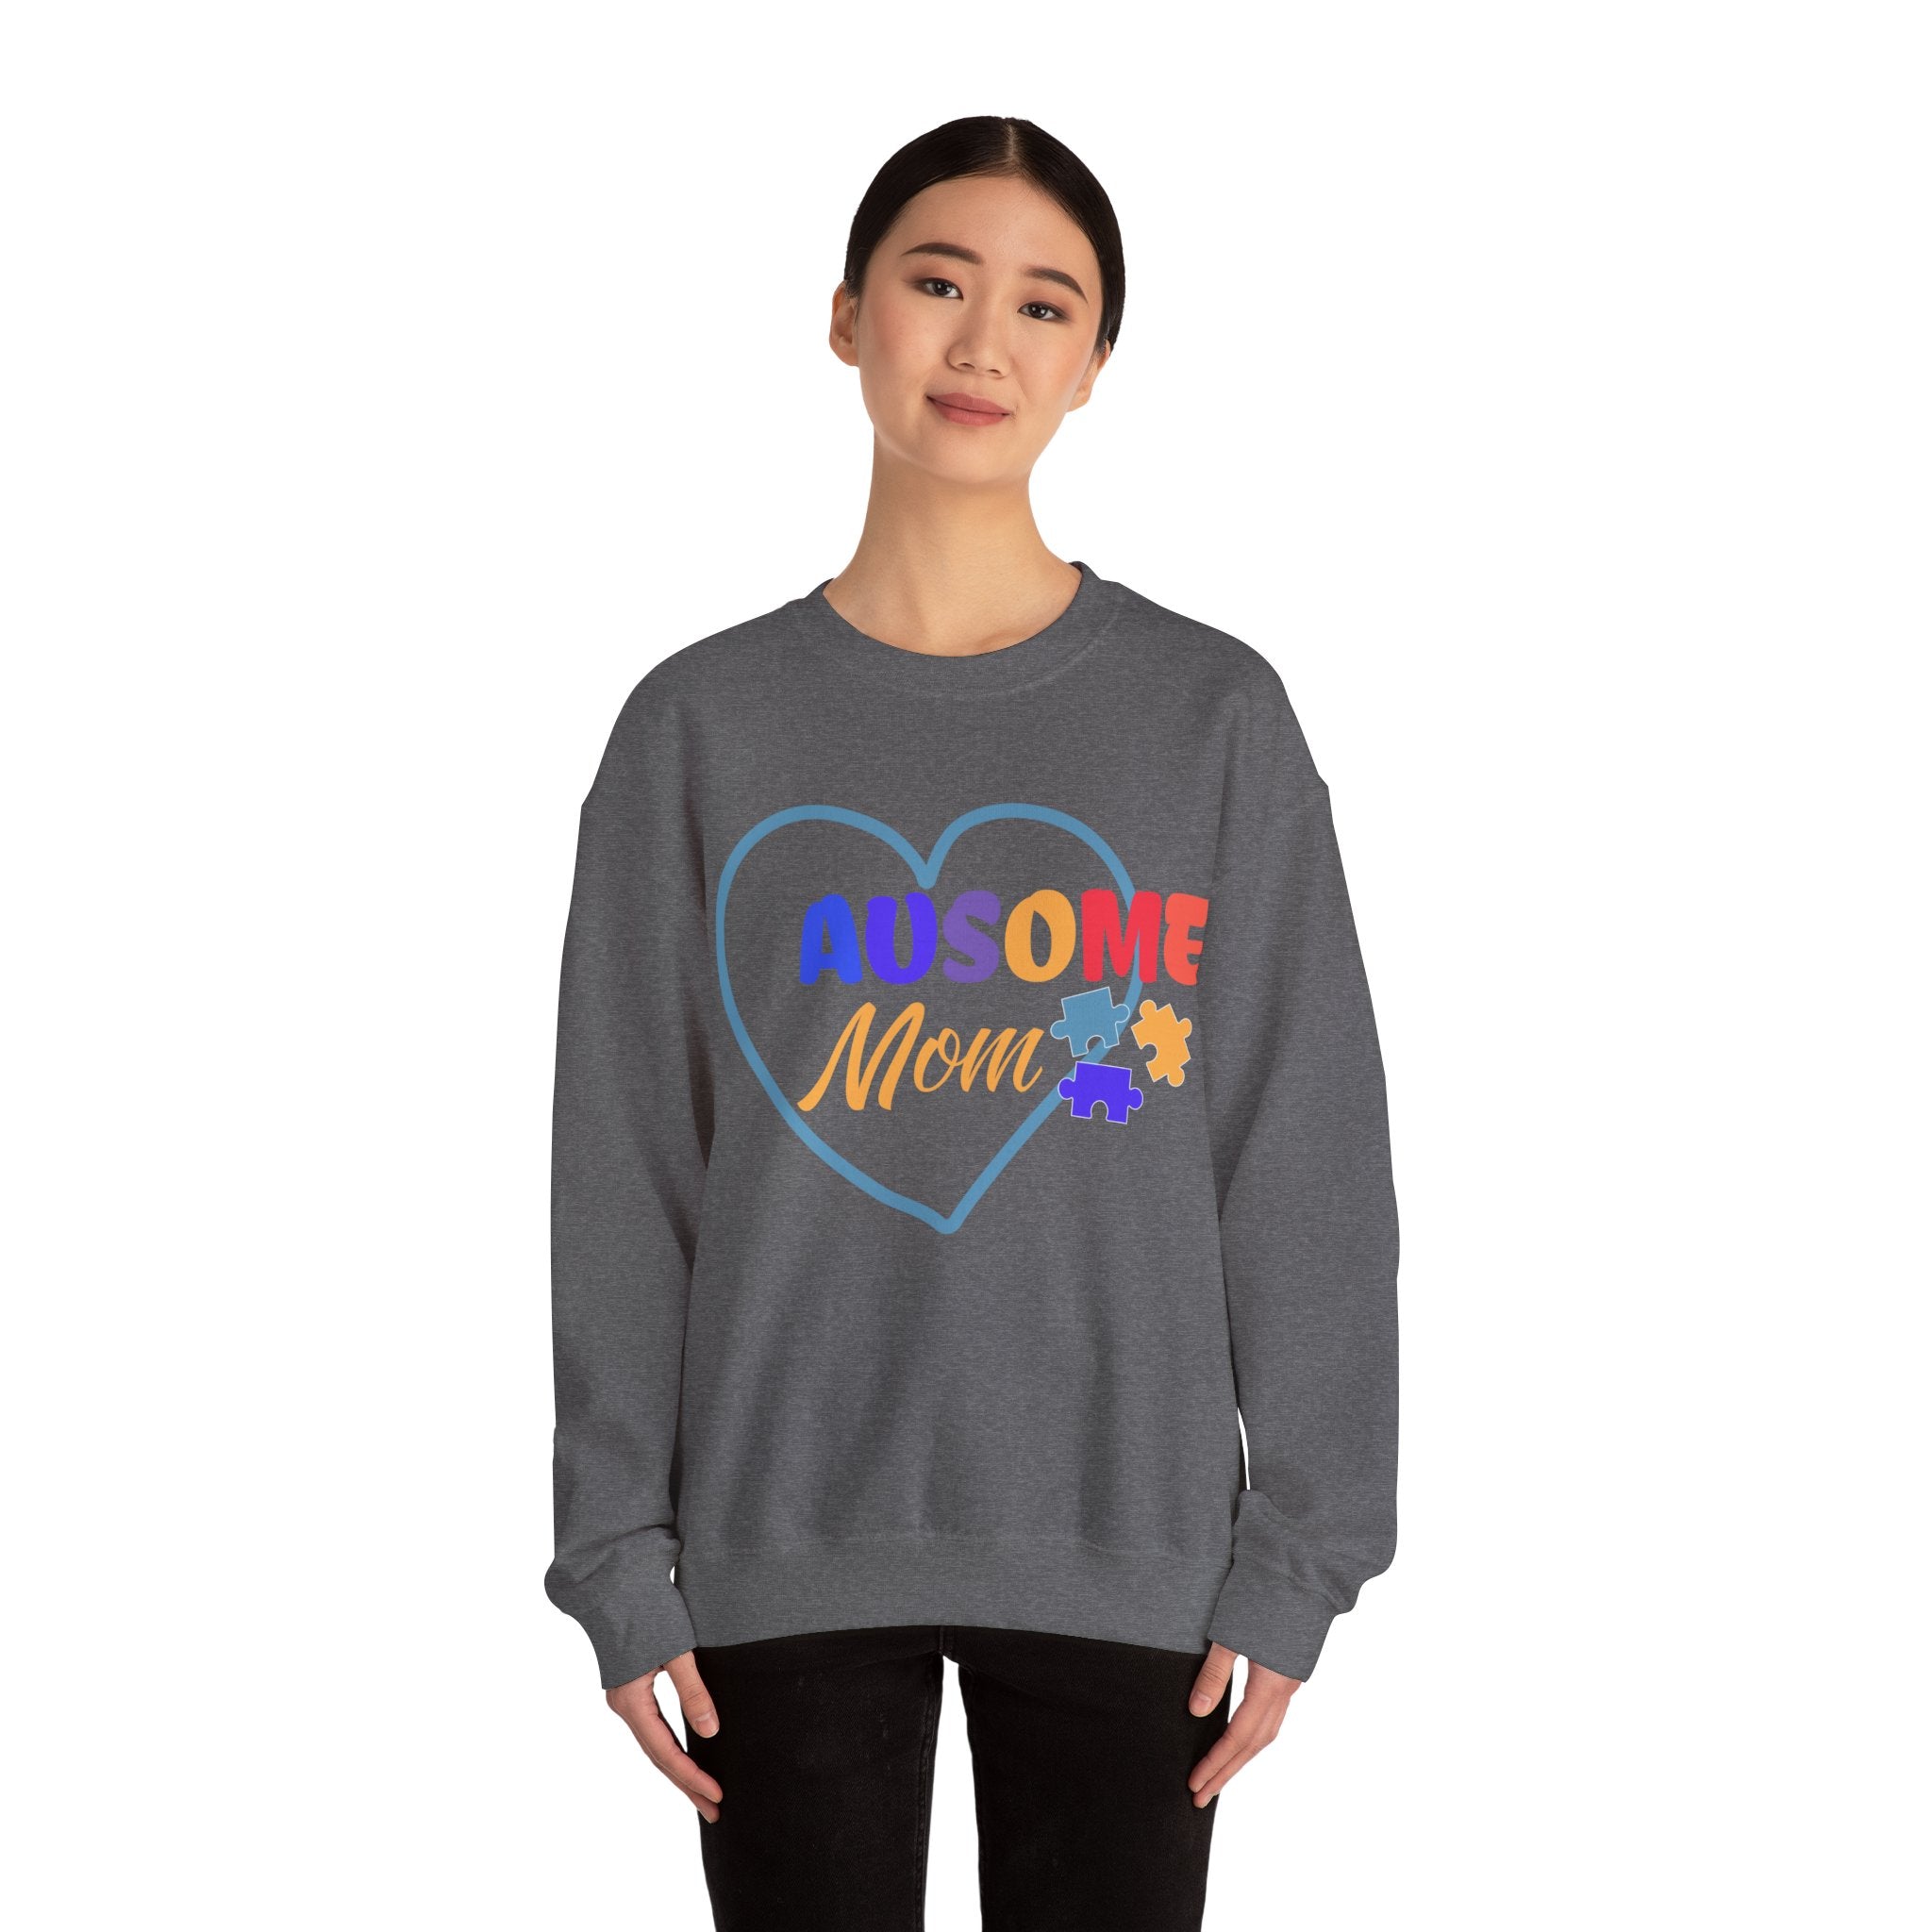 "Ausome Mom" Autism Awareness and Support Unisex Heavy Blend™ Crewneck Sweatshirt: Celebrating Incredible Autism Moms Gift for Family